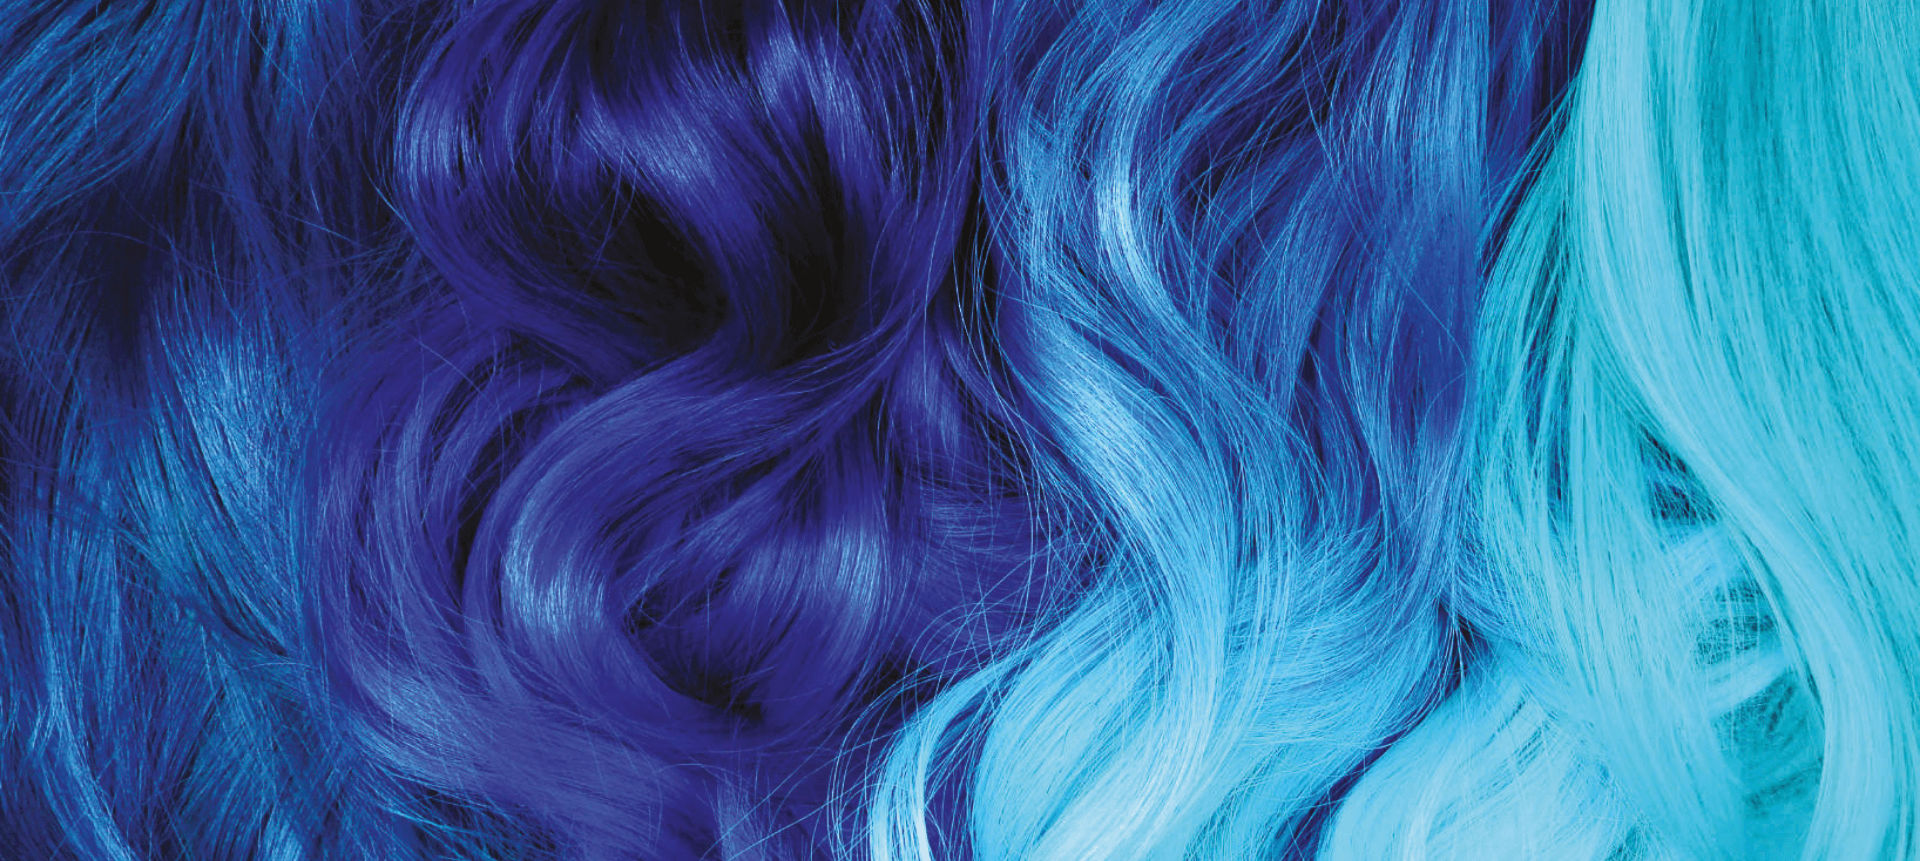 Hair dyed with shades of blue color